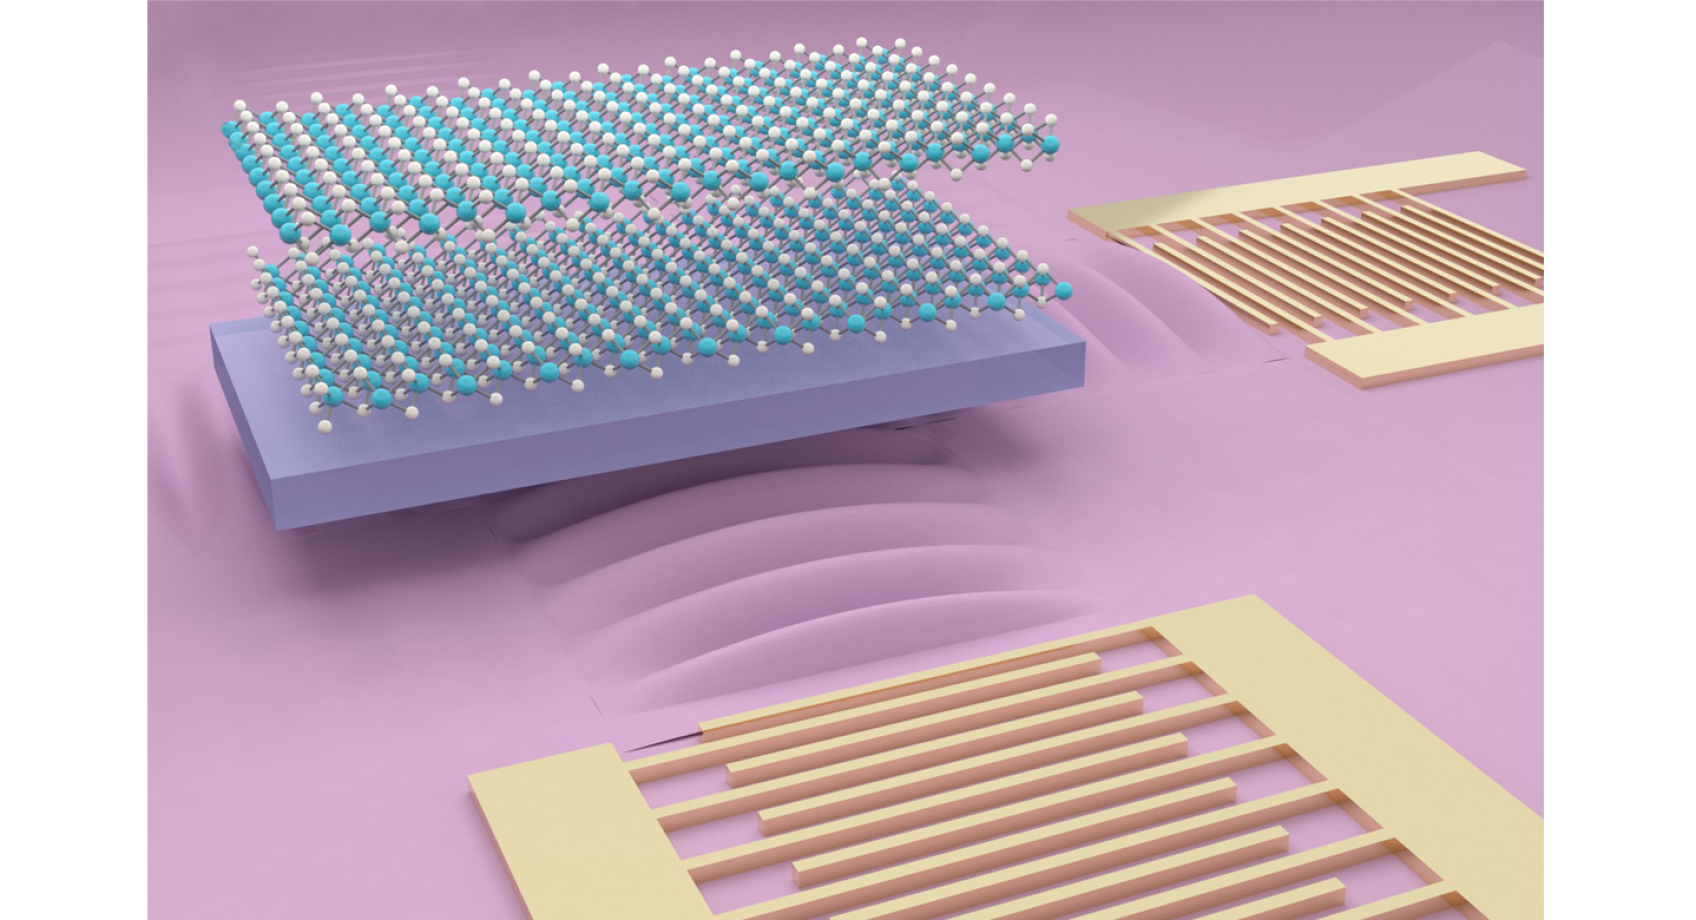 UW research team uses sound waves to move ‘excitons’ further than ever before, leading toward faster and more energy efficient electronics and optical devices Banner